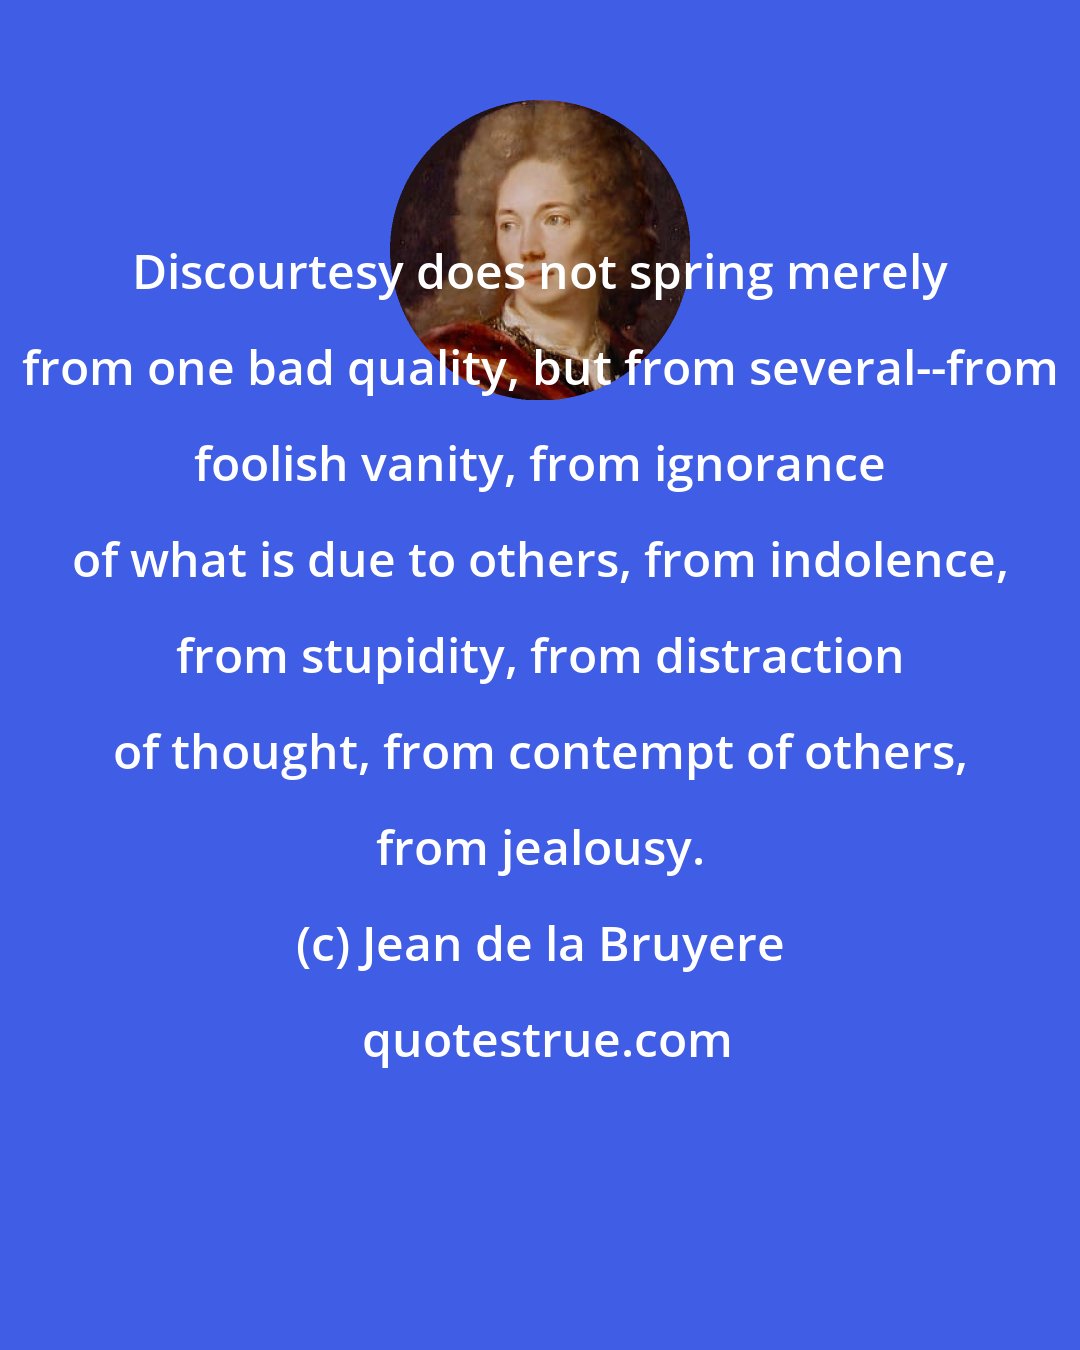 Jean de la Bruyere: Discourtesy does not spring merely from one bad quality, but from several--from foolish vanity, from ignorance of what is due to others, from indolence, from stupidity, from distraction of thought, from contempt of others, from jealousy.